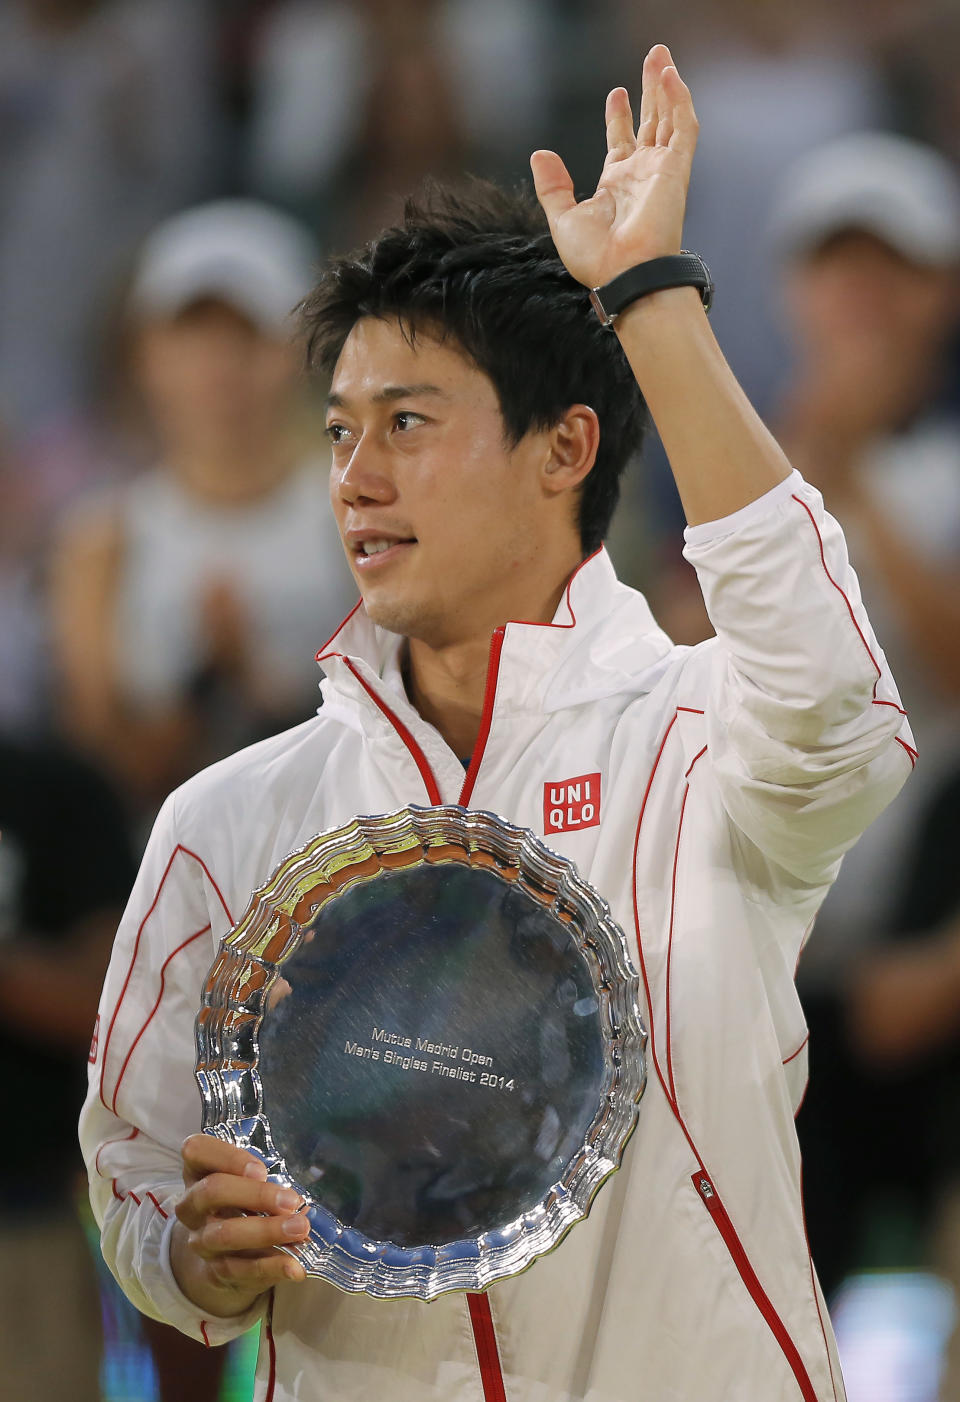 Kei Nishikori from Japan holds his trophy while waving after his Madrid Open tennis tournament final match against Rafael Nadal from Spain in Madrid, Spain, Sunday, May 11, 2014. (AP Photo/Andres Kudacki)